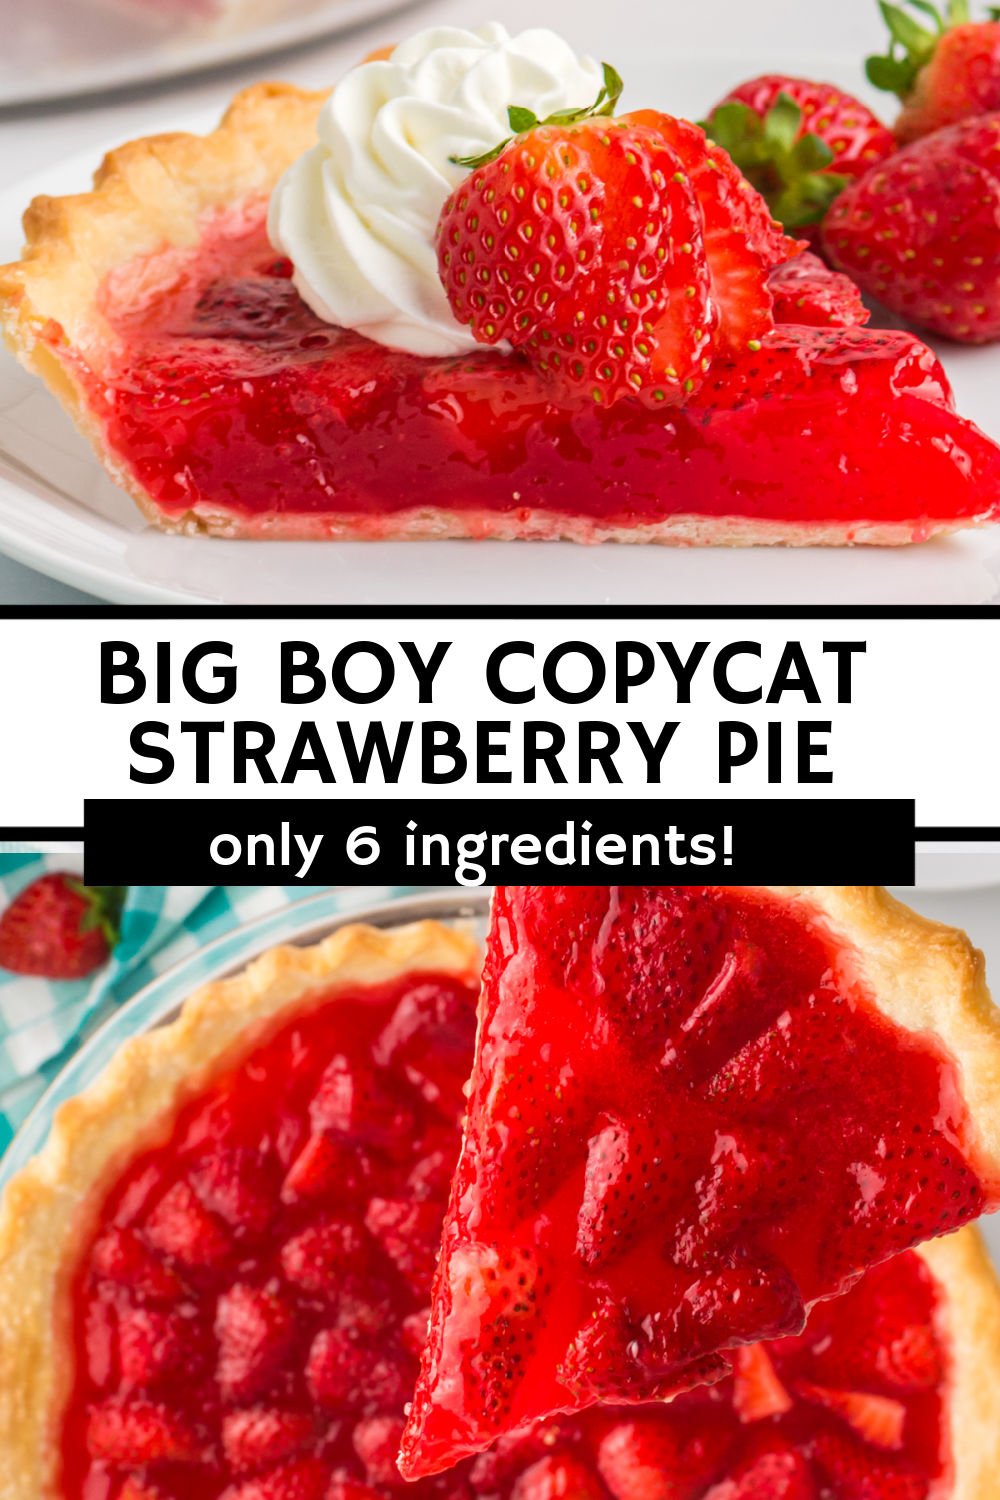 This vintage strawberry pie is a copycat version of the one you'd find at a Big Boy restaurant. Full of fresh strawberries and strawberry Jell-O, this easy recipe is perfect for summer months! | www.persnicketyplates.com